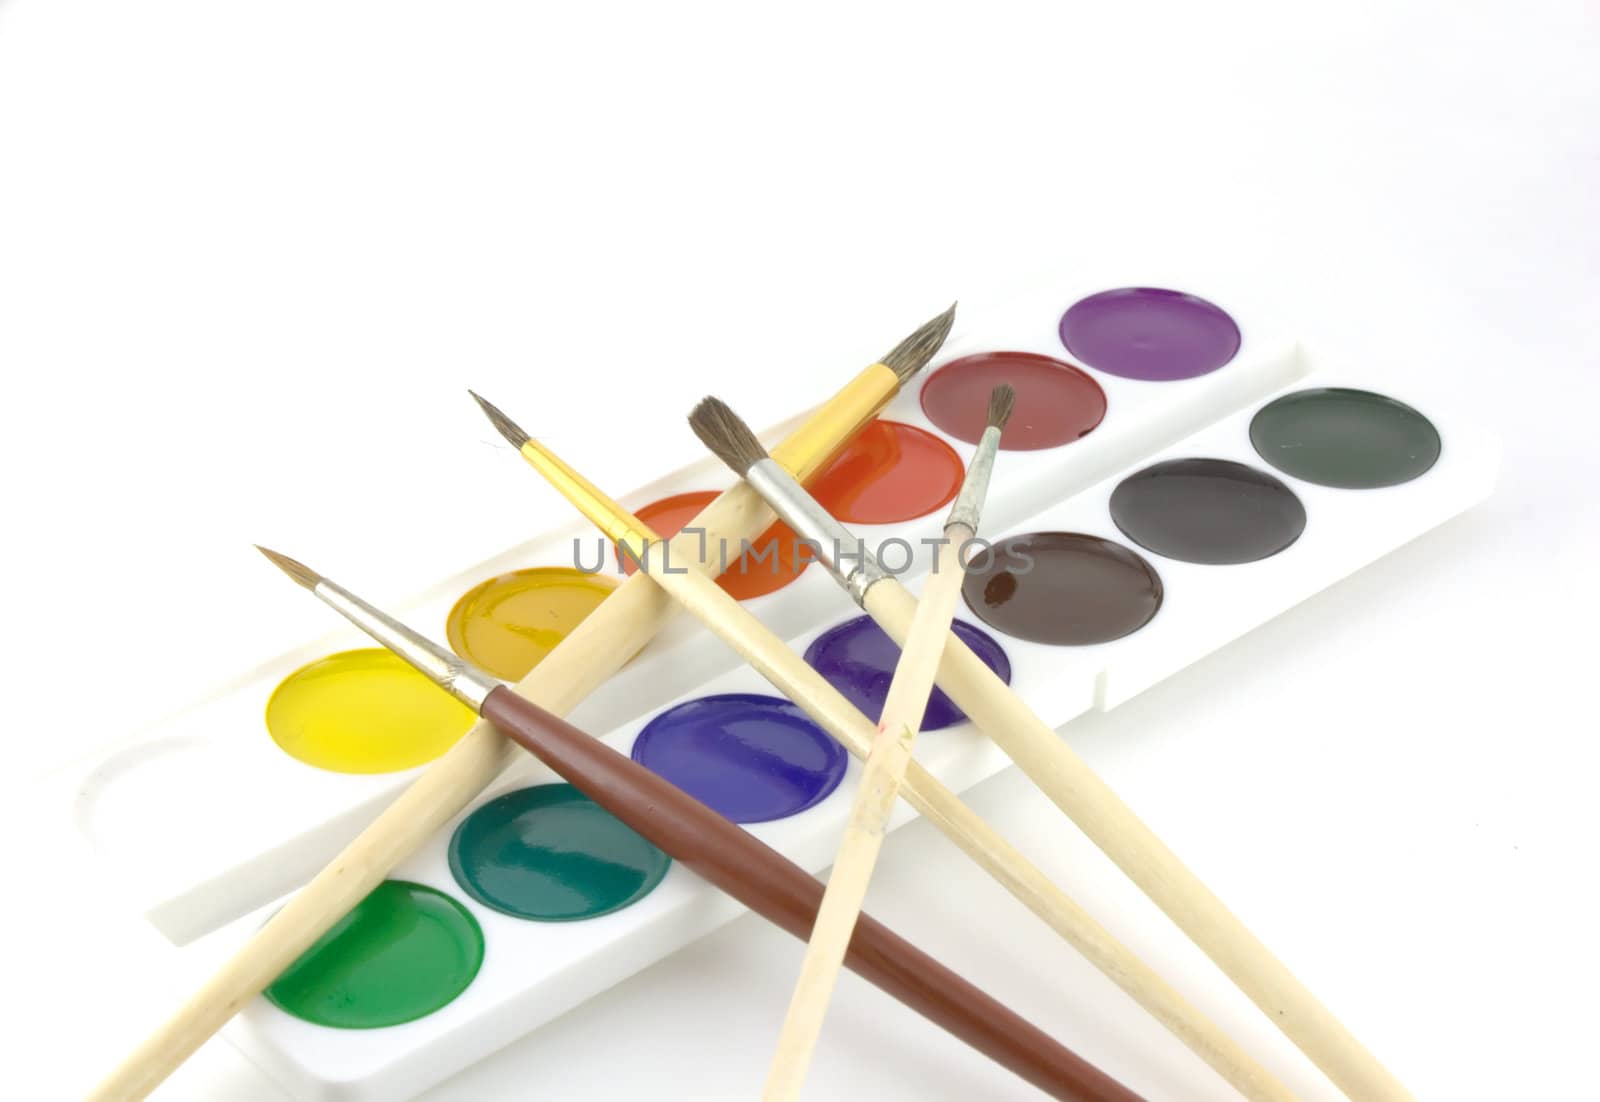 Water-color and paintbrushes by sergpet